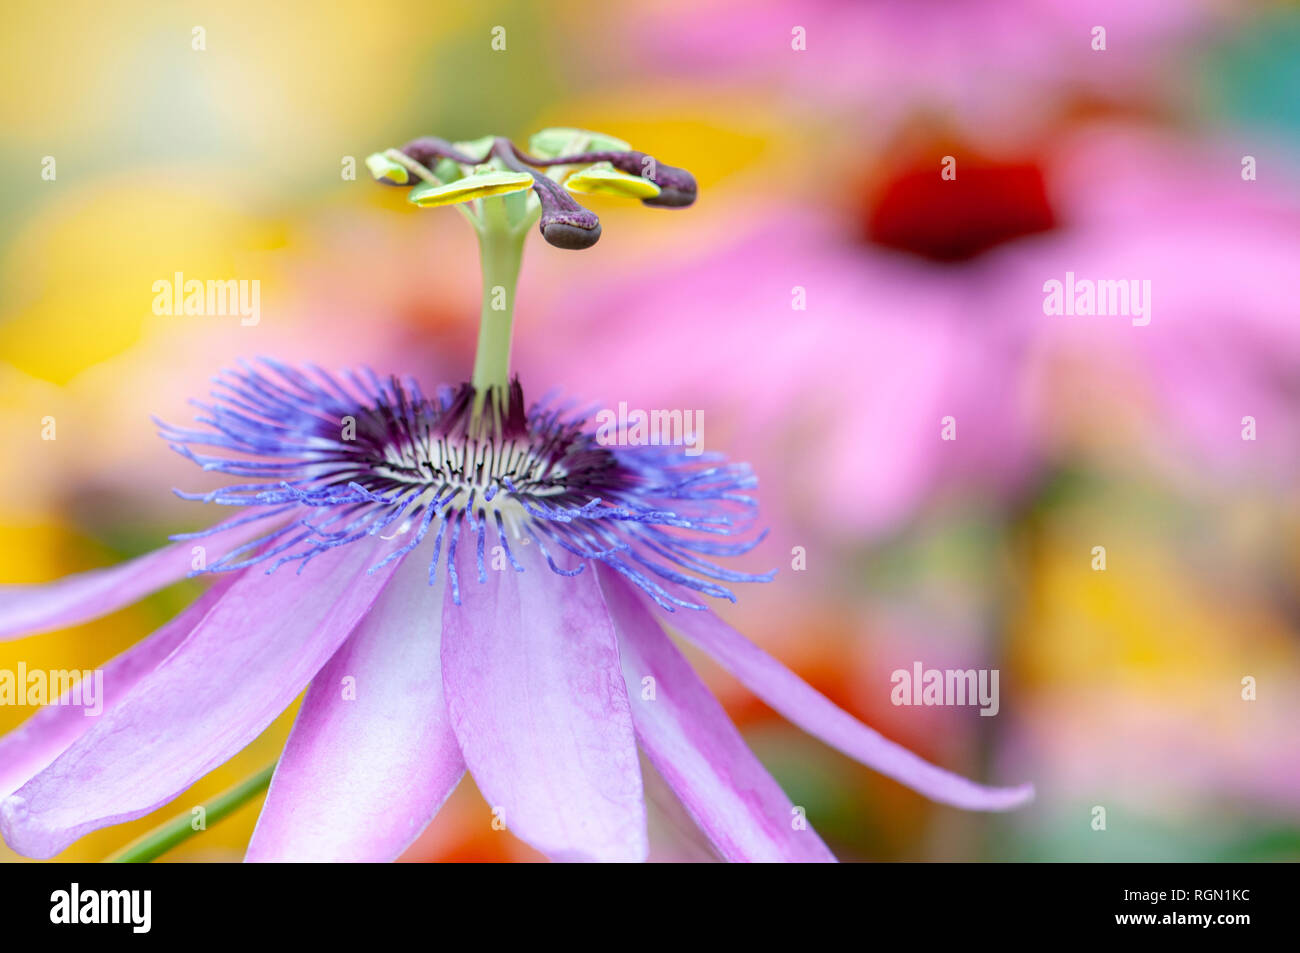 Close-up image of the summer flower vibrant Passion flower 'Lavender Lady' - Passiflora 'Lavender Lady' Stock Photo